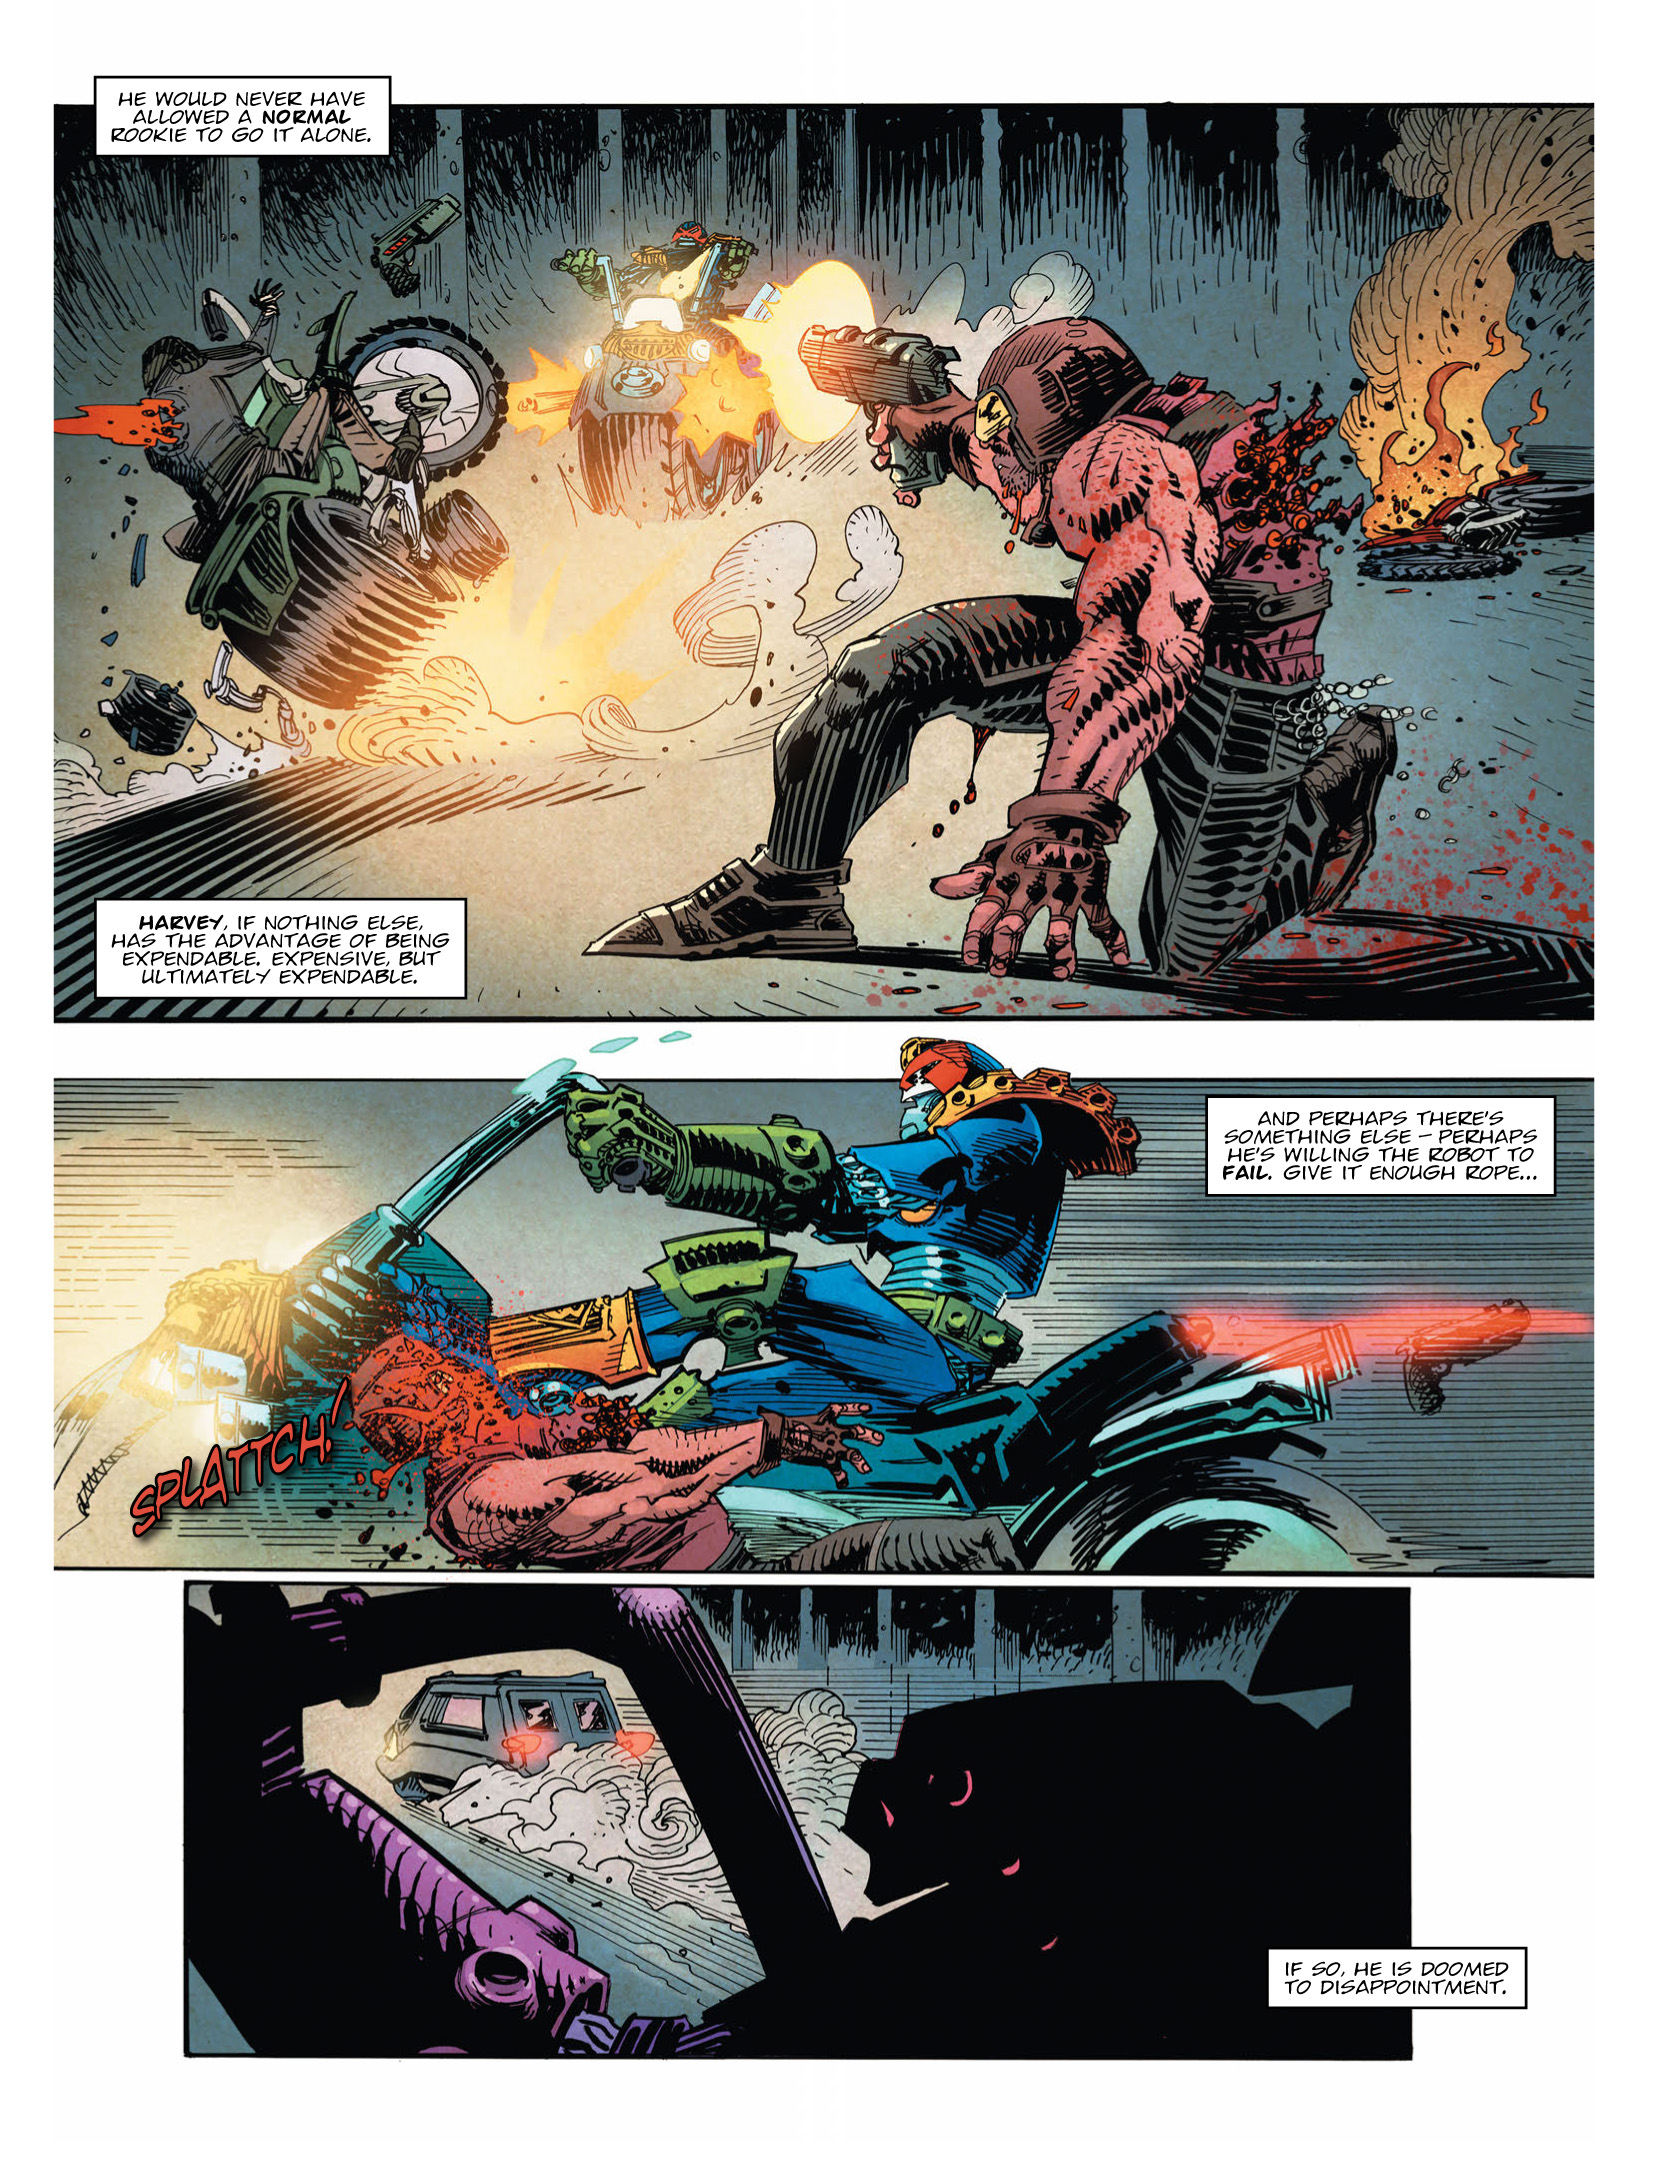 2000 AD: Chapter 2027 - Page 4